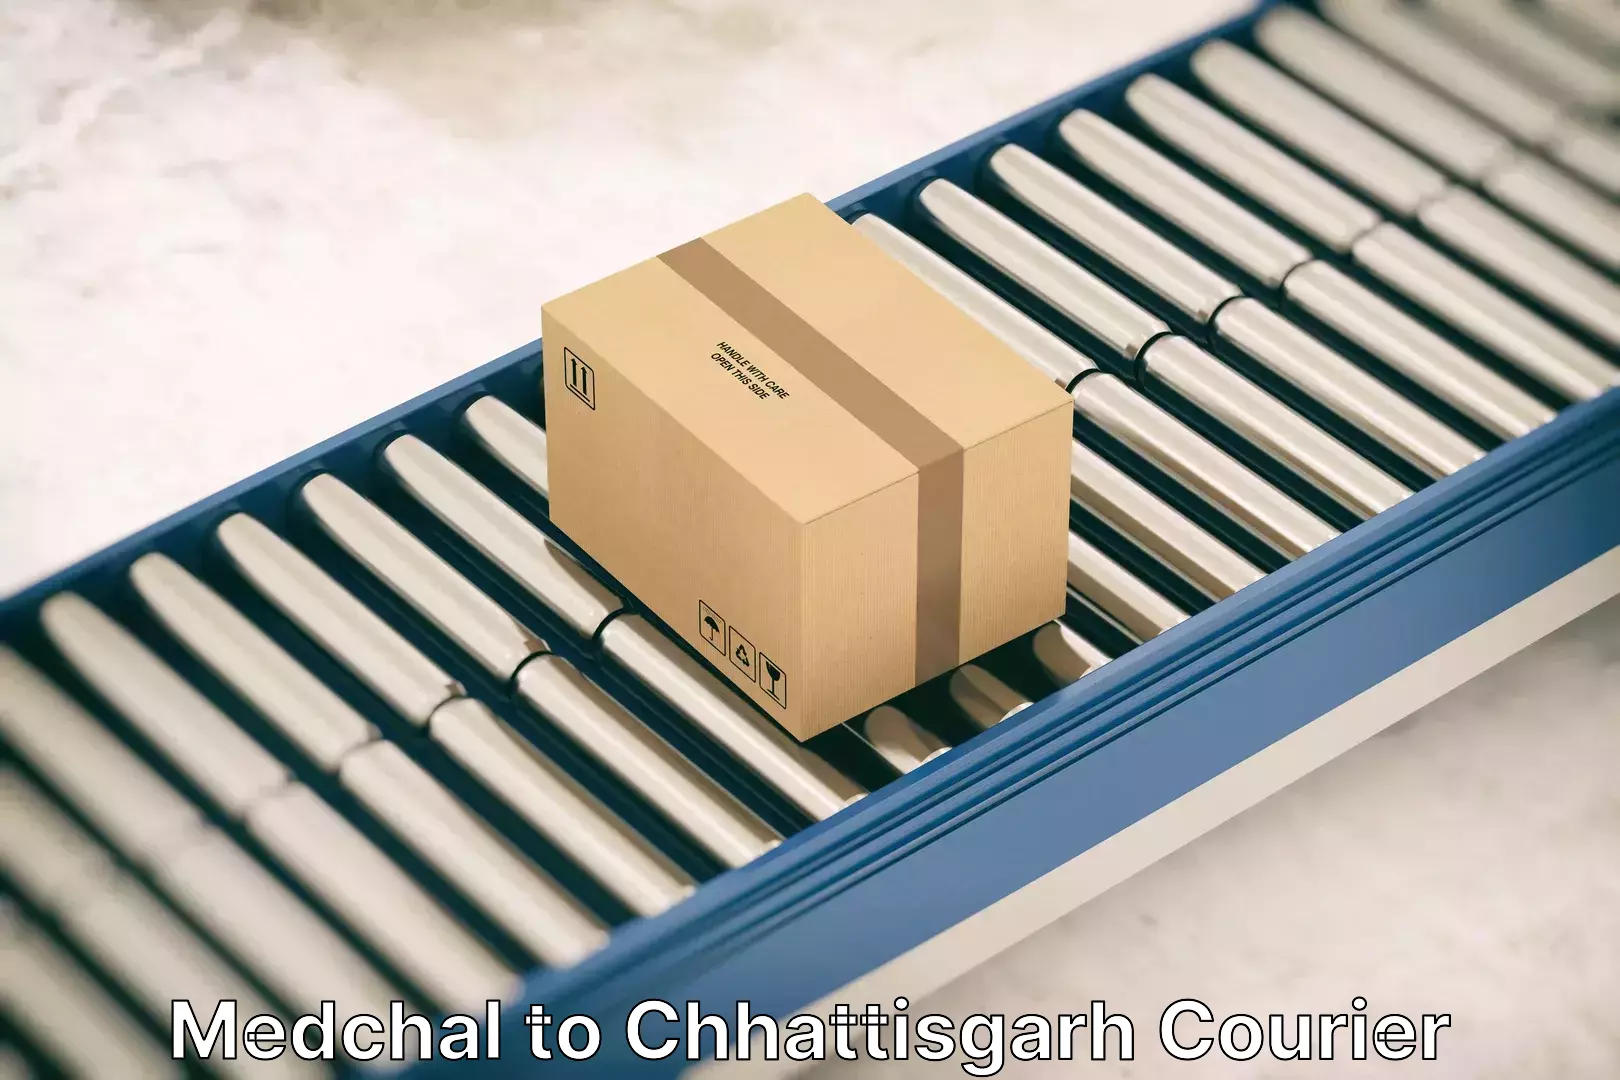 Moving and packing experts Medchal to Chhattisgarh